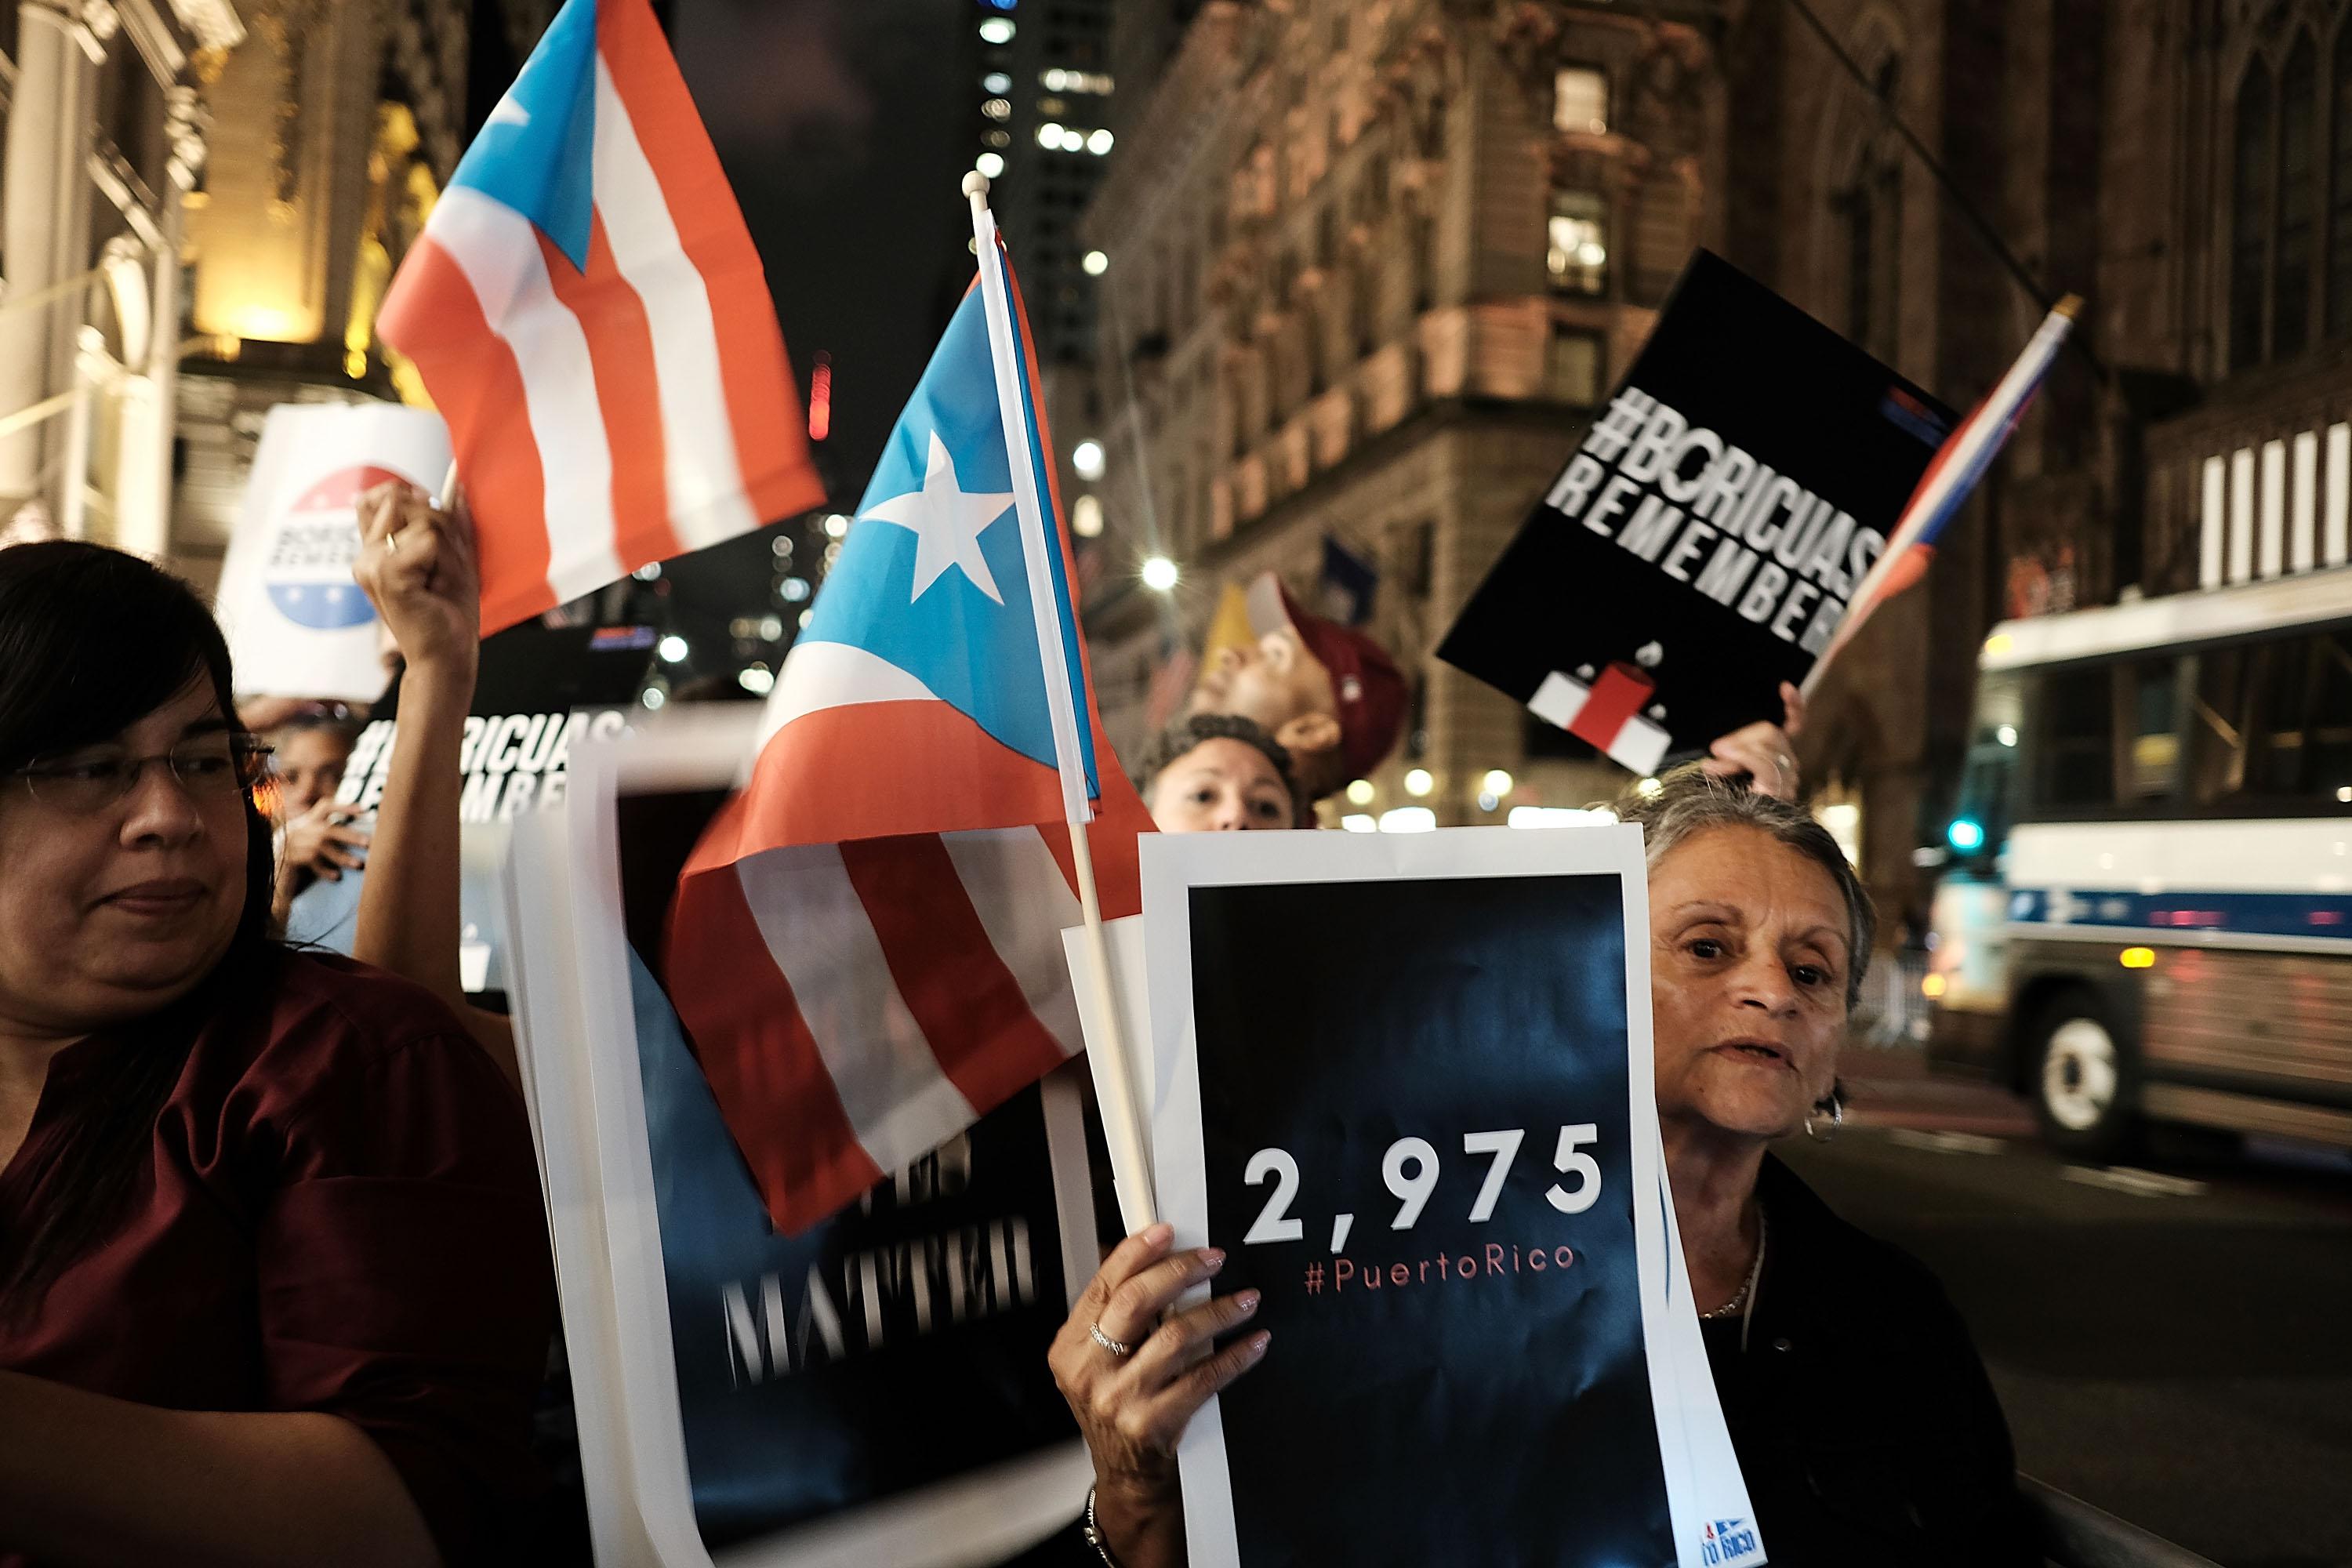 People march to Trump Tower following a service at St. Bartholomew's Church for the one year anniversary of Hurricane Maria on September 20, 2018 in New York, New York. The evening service sought to celebrate and remember the lives of the nearly 3,000 people who died as a result of Hurricane Maria.